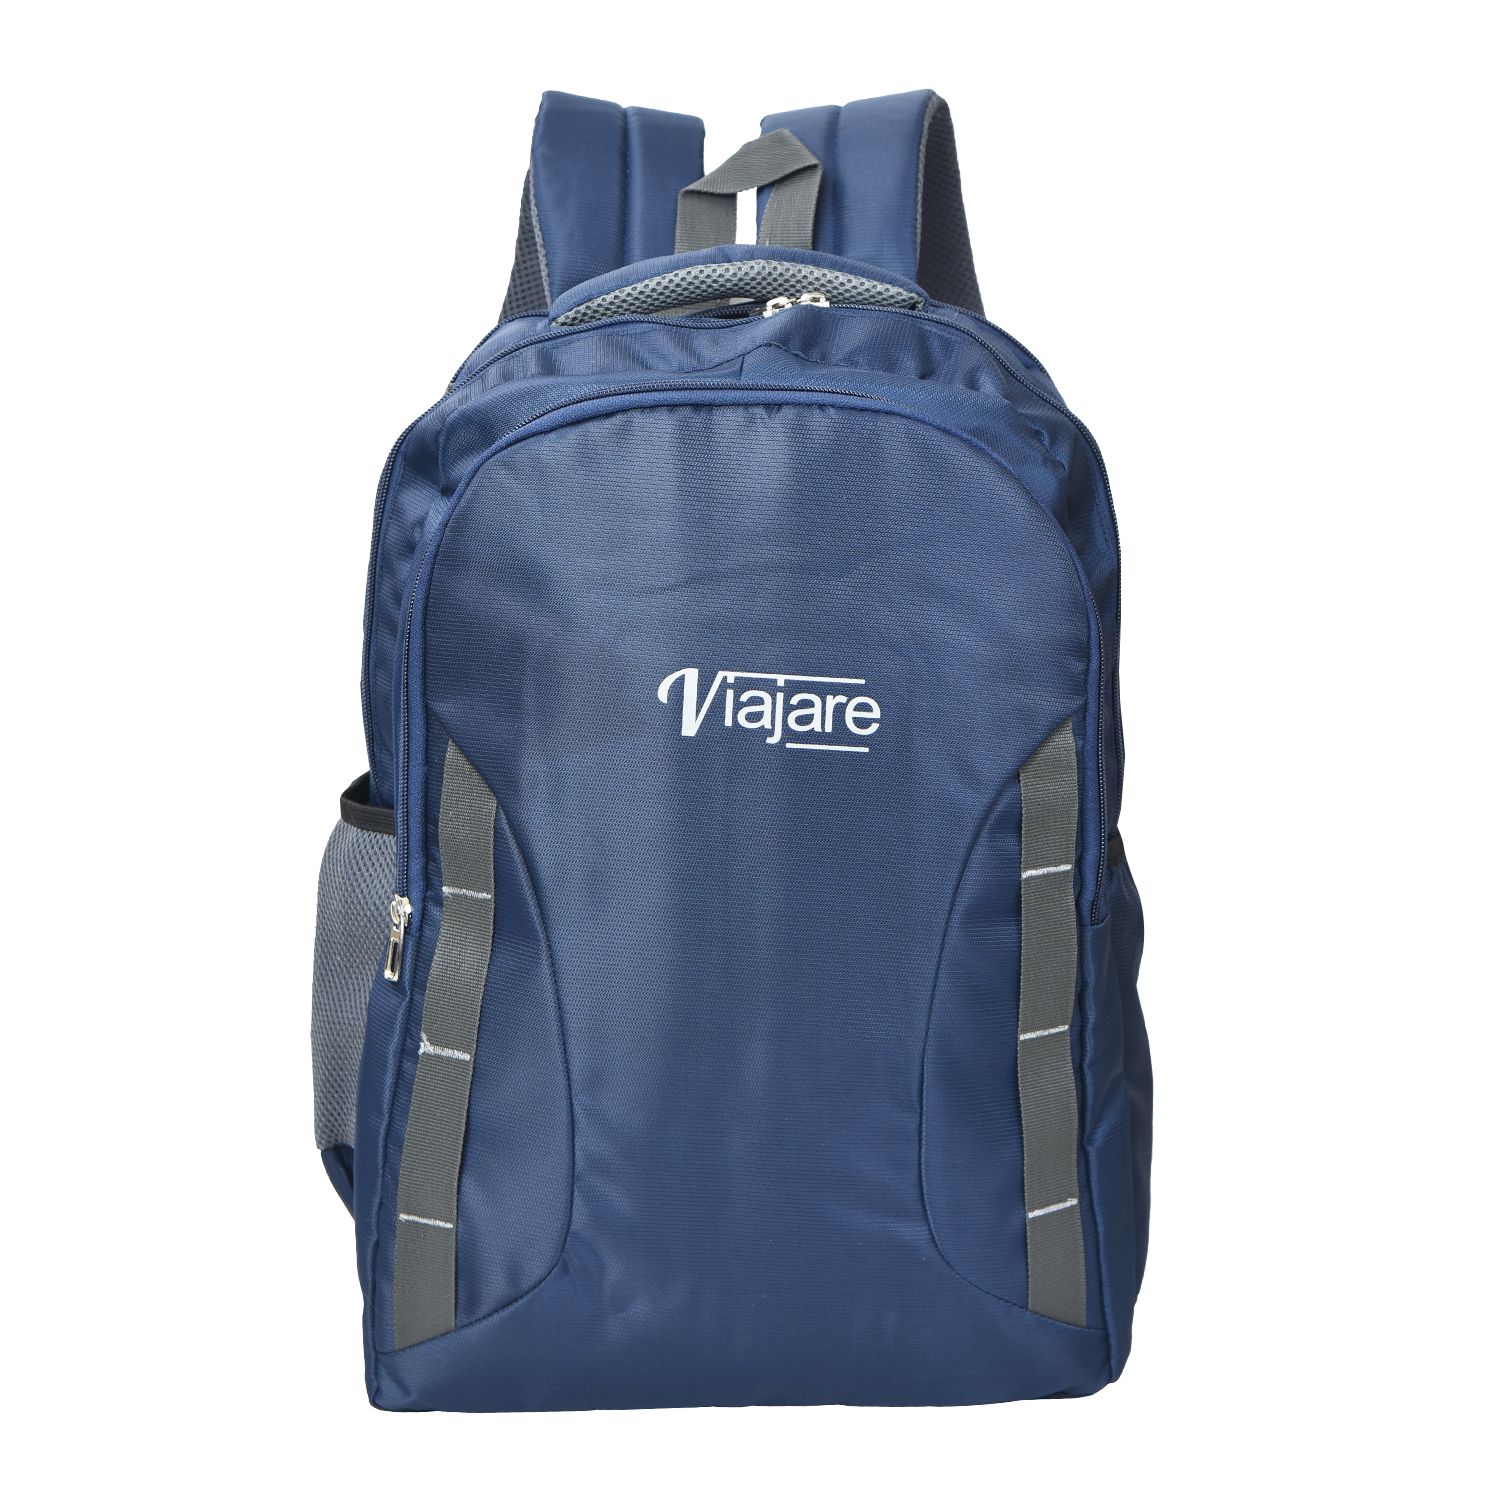 Viajare Techie Backpack with rain cover